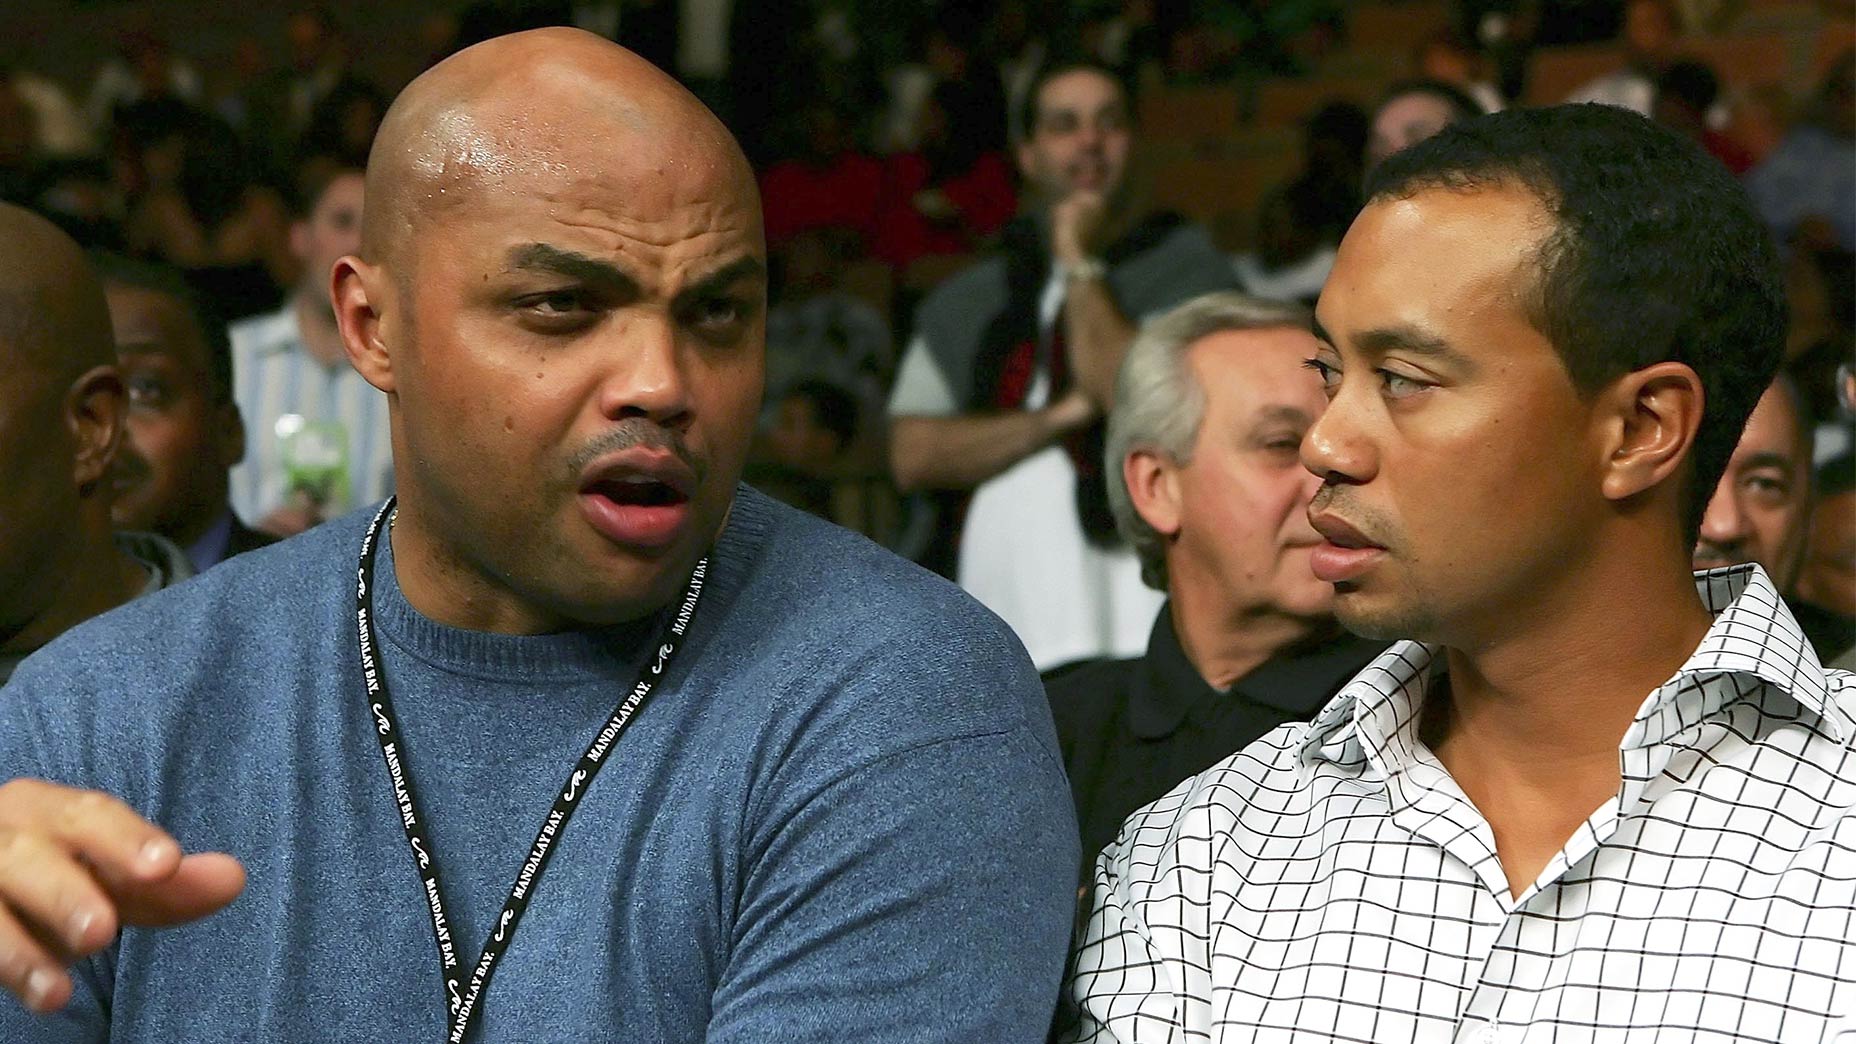 The Match III:  Charles Barkley Will Make You Feel Better About Your Game